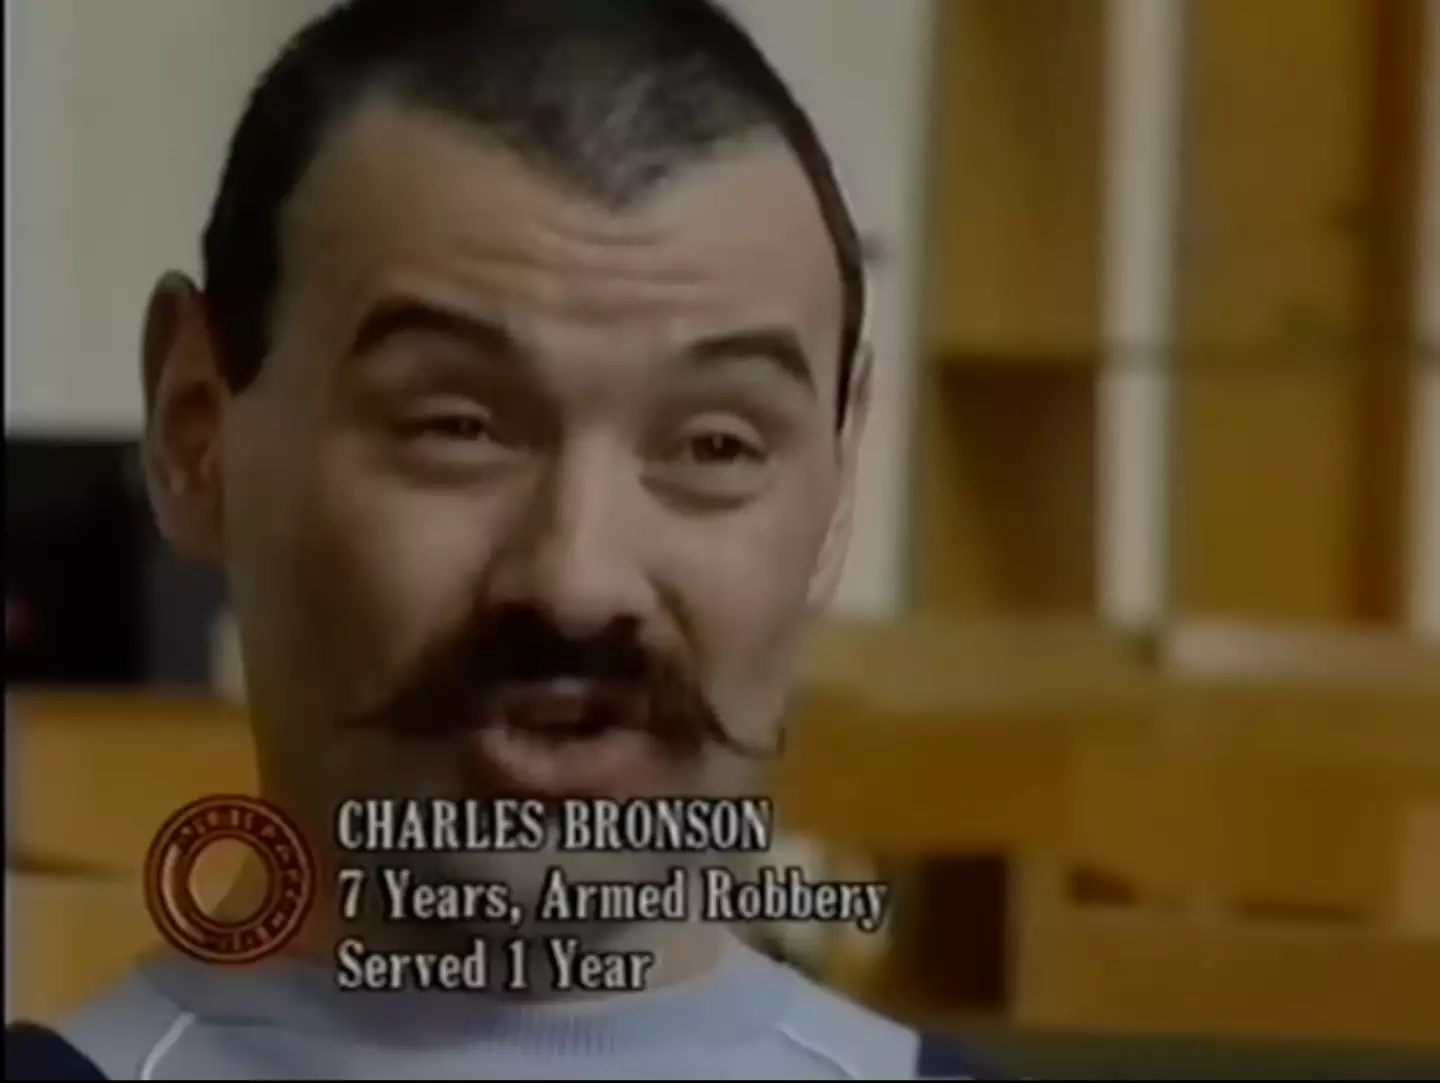 Bronson talking from prison in 1989.